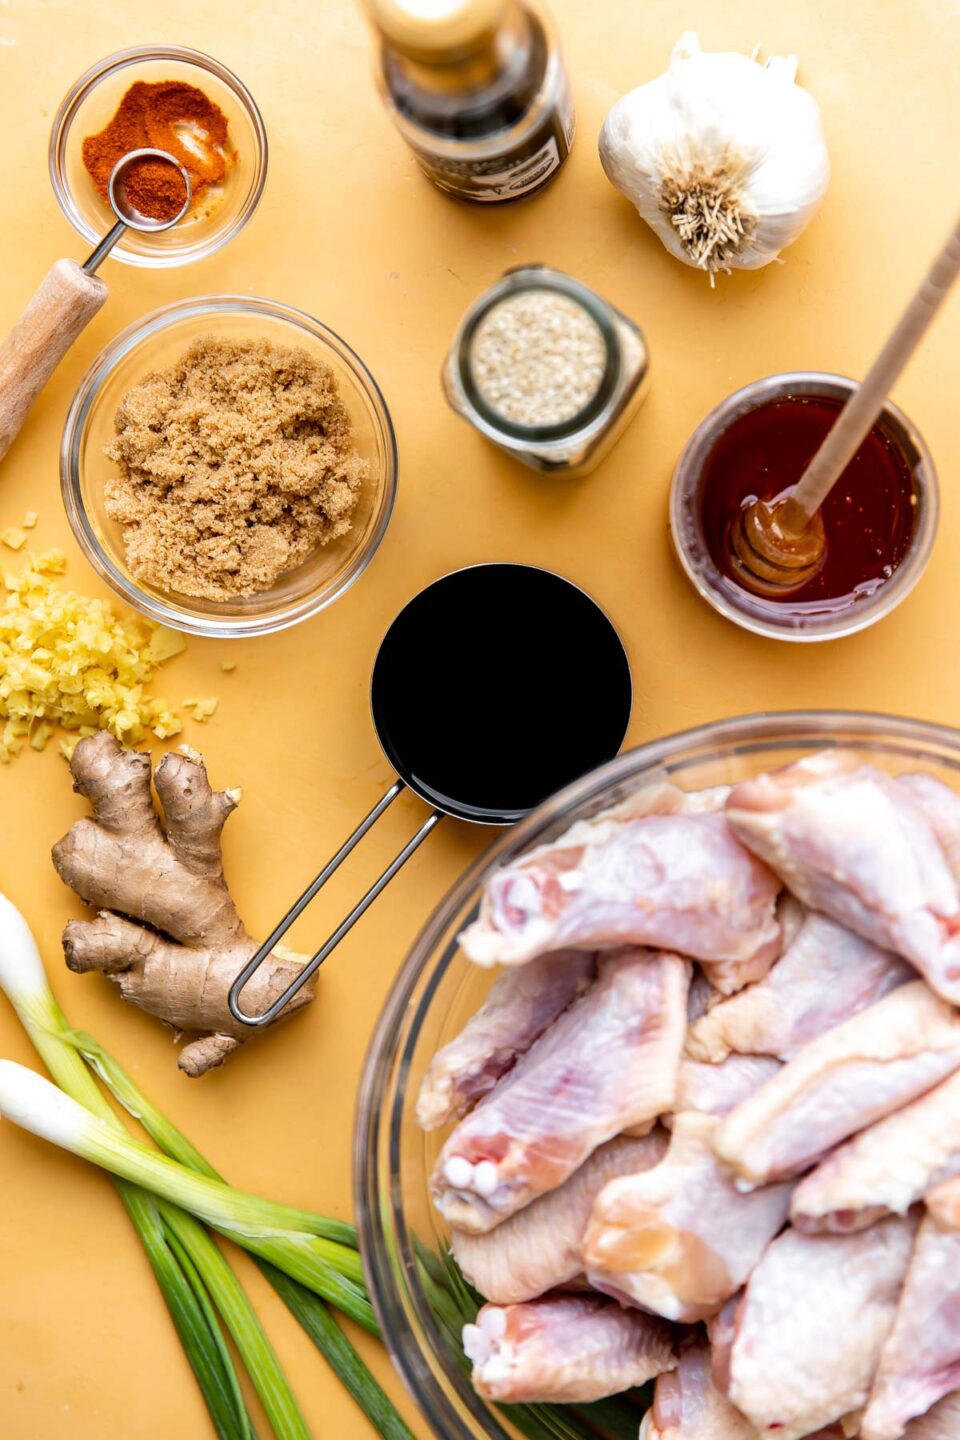 Honey sesame chicken wings ingredients arranged on a yellow textured surface: chicken wing sections, soy sauce, honey, dark brown sugar, sesame oil, fresh ginger, cayenne pepper, garlic, sesame seeds, and green onions.